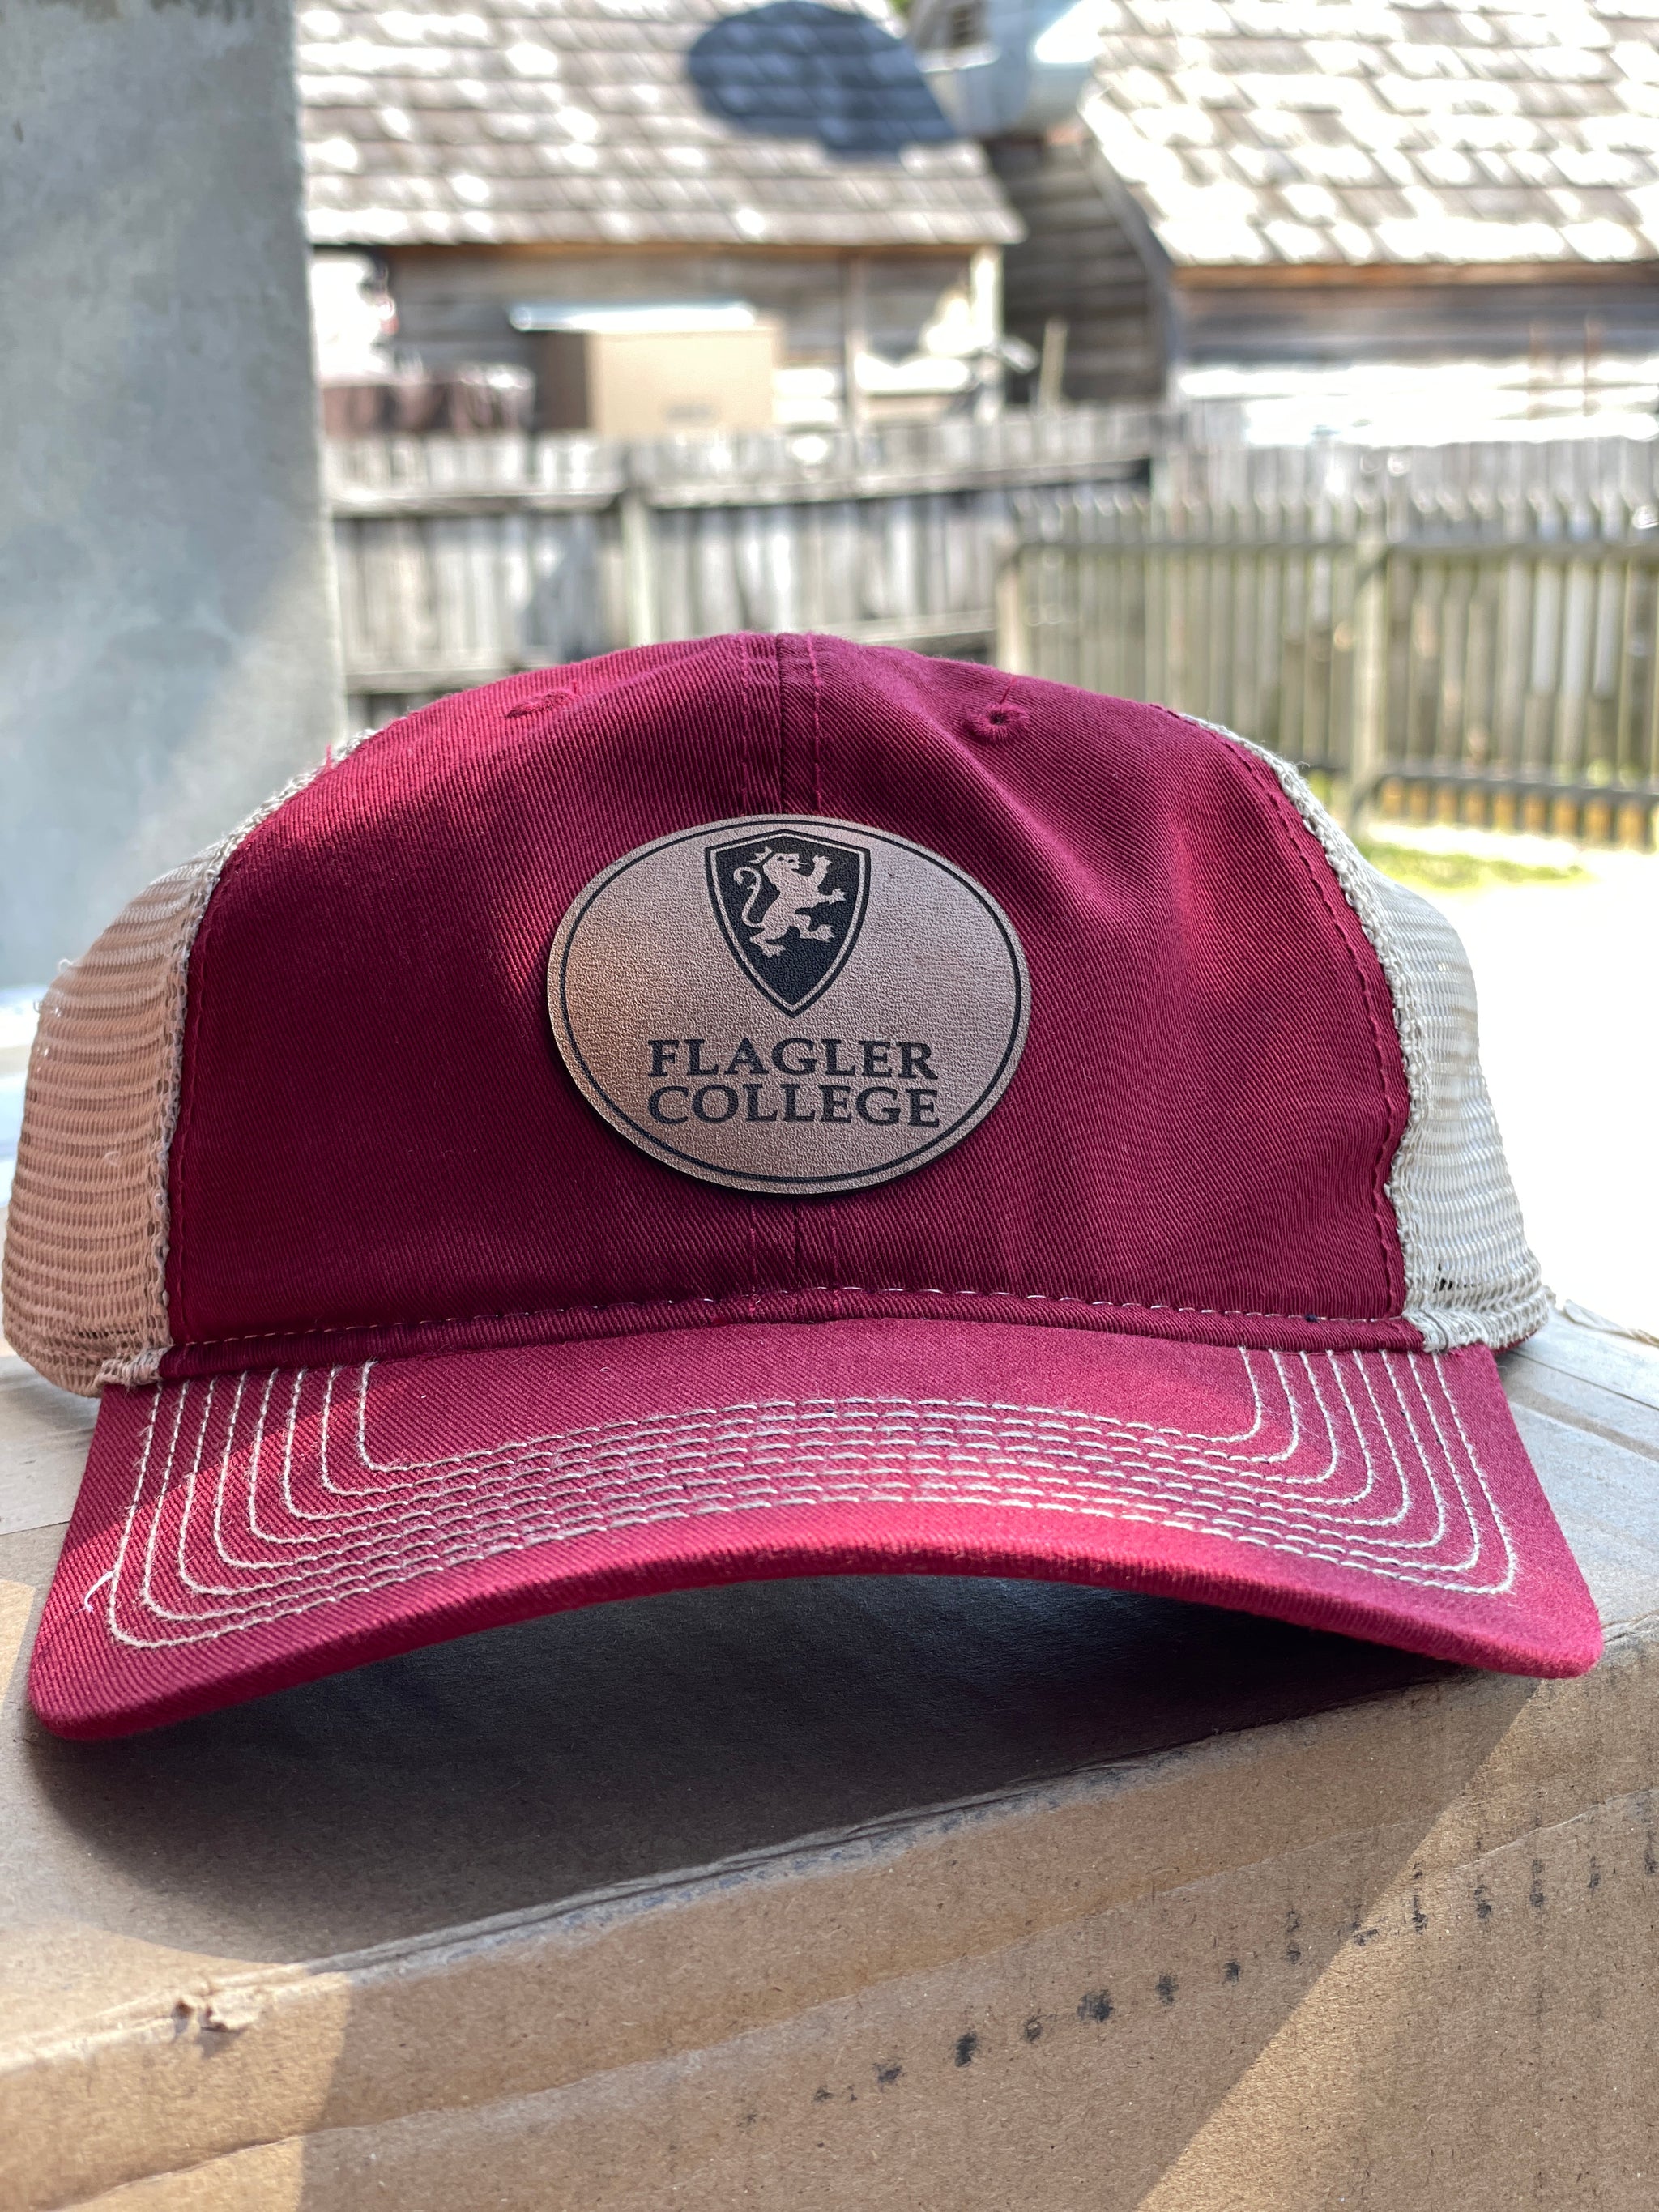 Crimson hat with brown mesh and patch in center with Black flagler shield logo over Black imprint saying Flagler over College